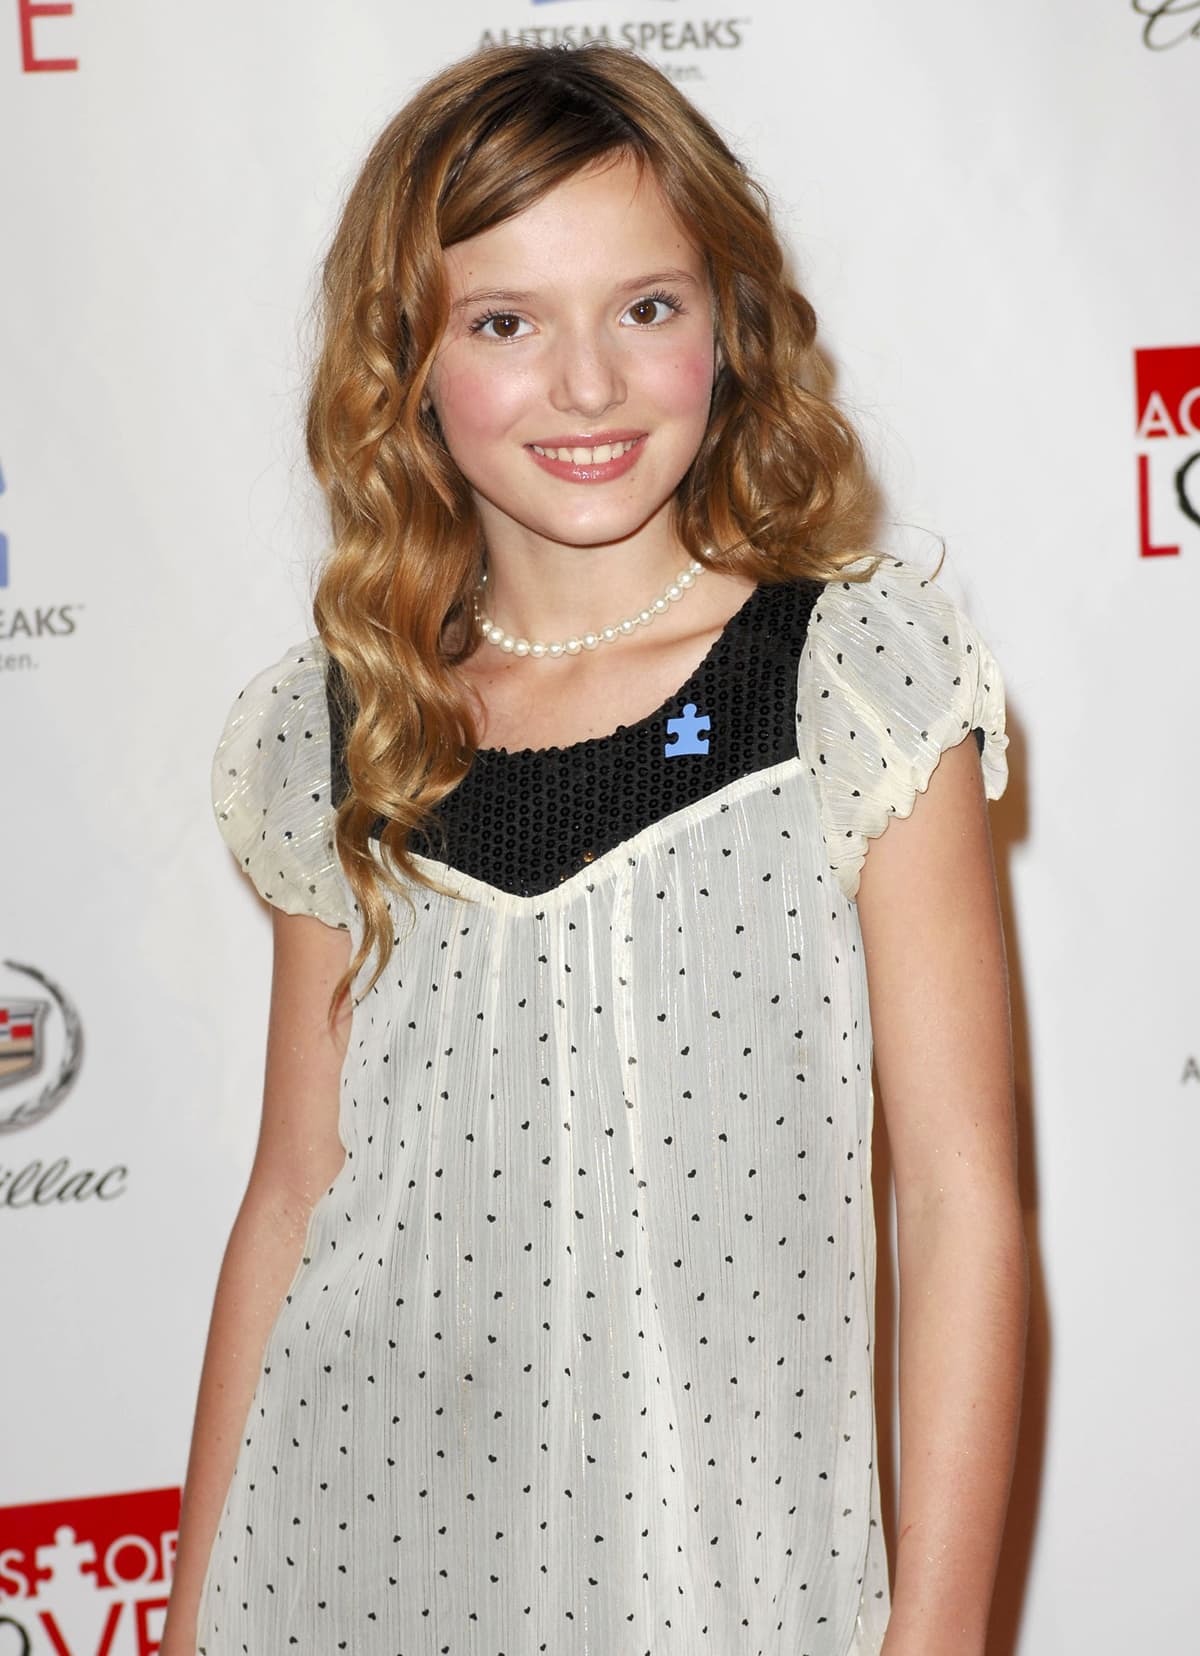 Bella Thorne attends the Autism Speaks Sixth Annual Acts of Love Celebration at The Geffen Playhouse